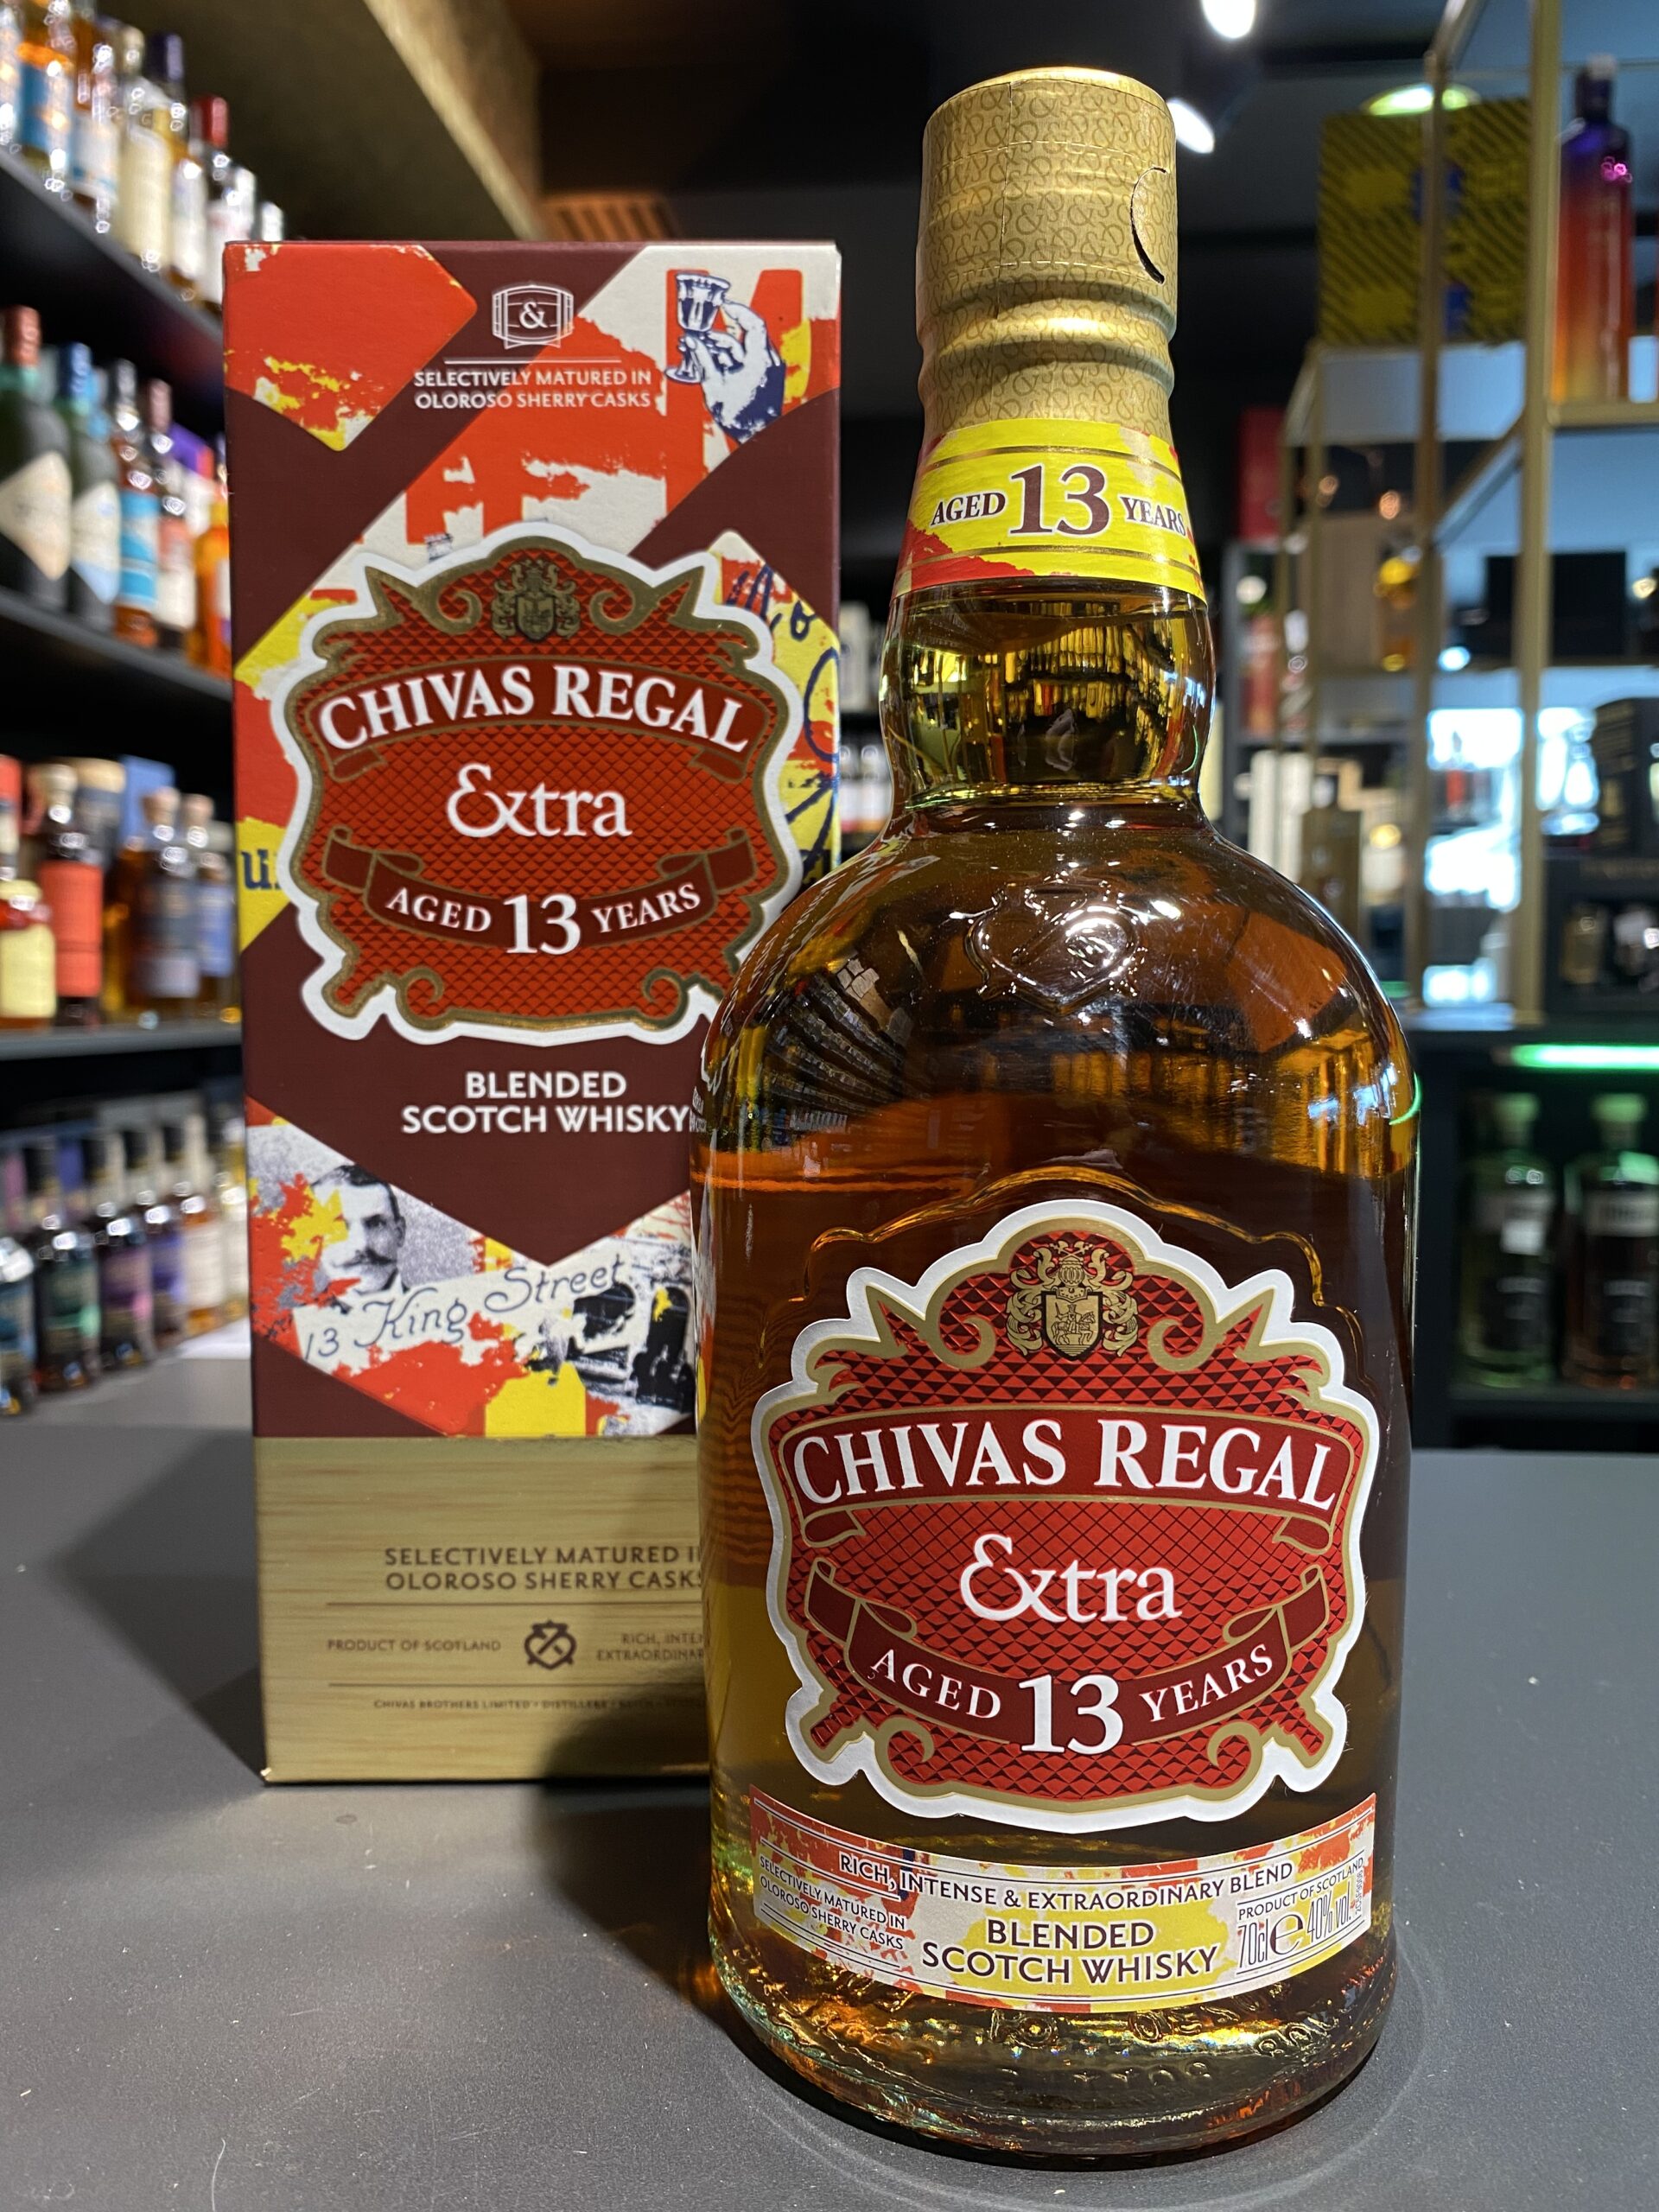 Chivas Regal Oloroso Sherry Casks Whisky 43% 100 cl - Hellowcost